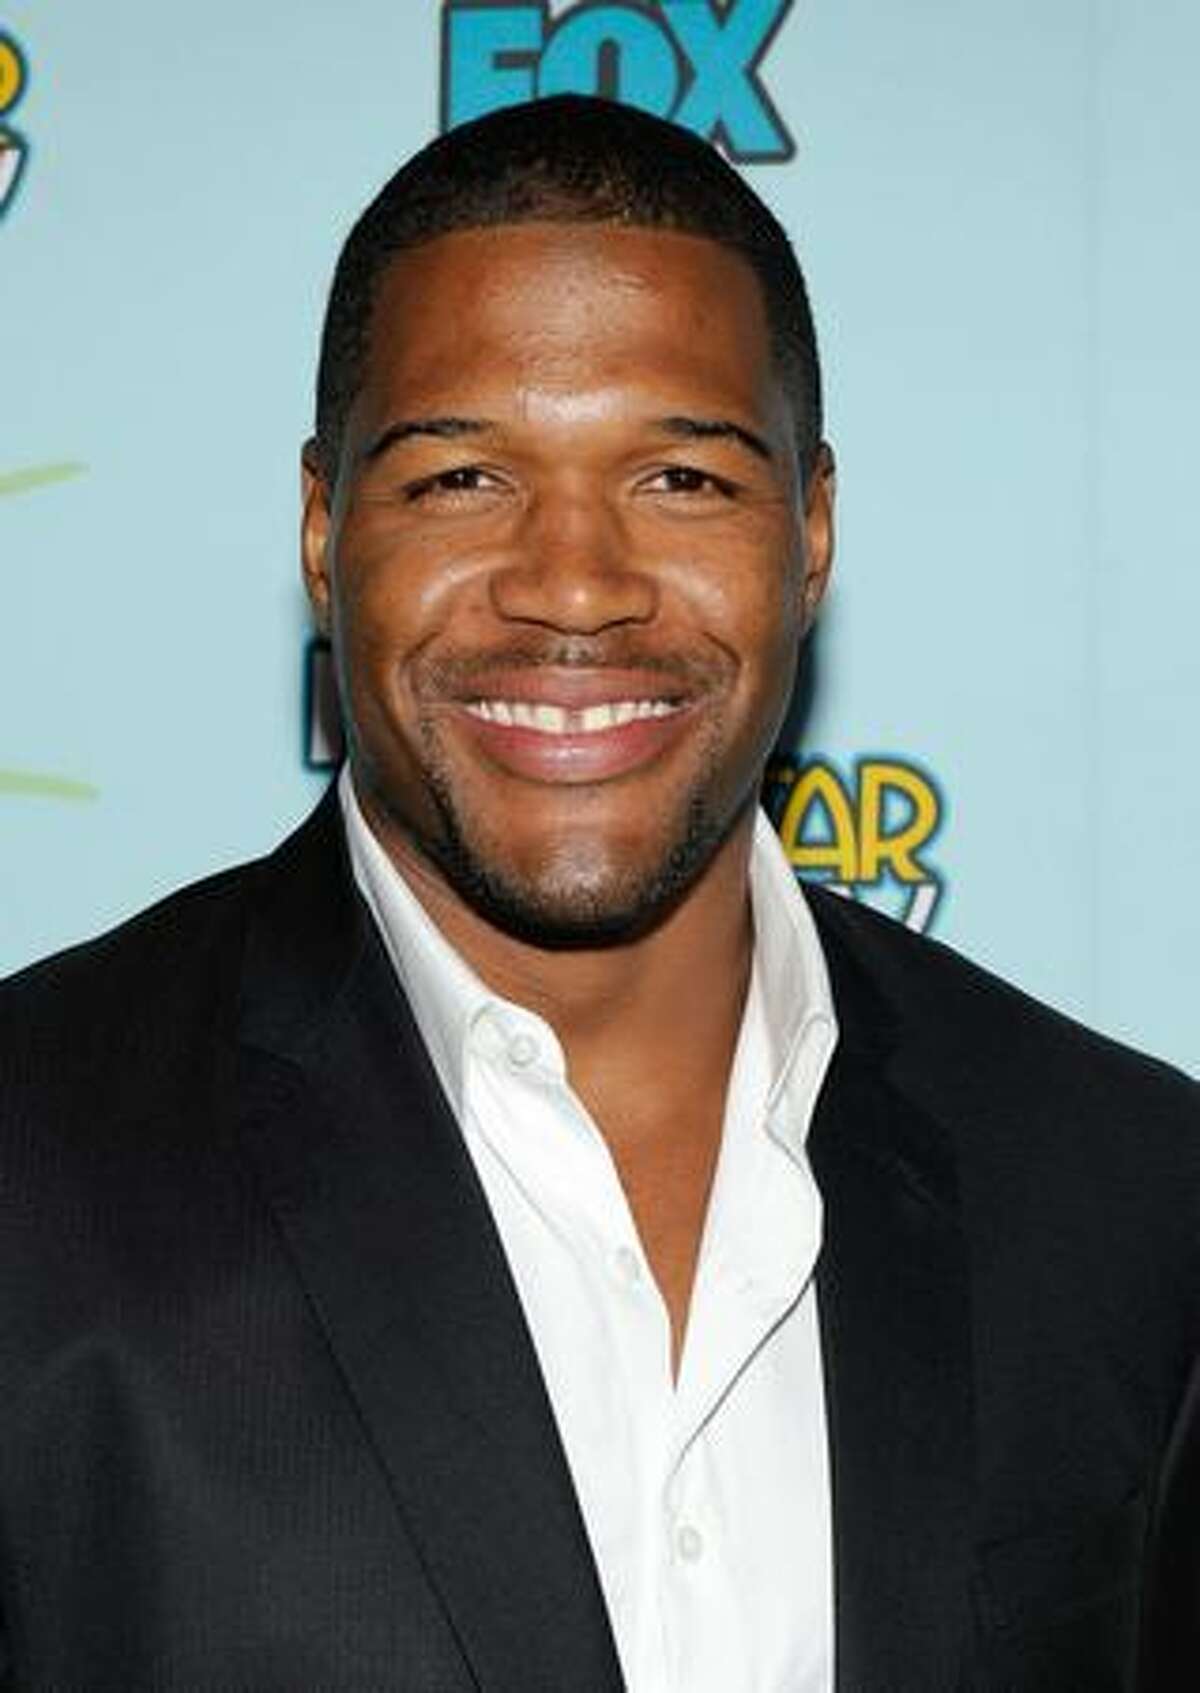 Actor Michael Strahan attends the 2009 FOX All-Star Party held at the Langham Hotel in Pasadena, California.